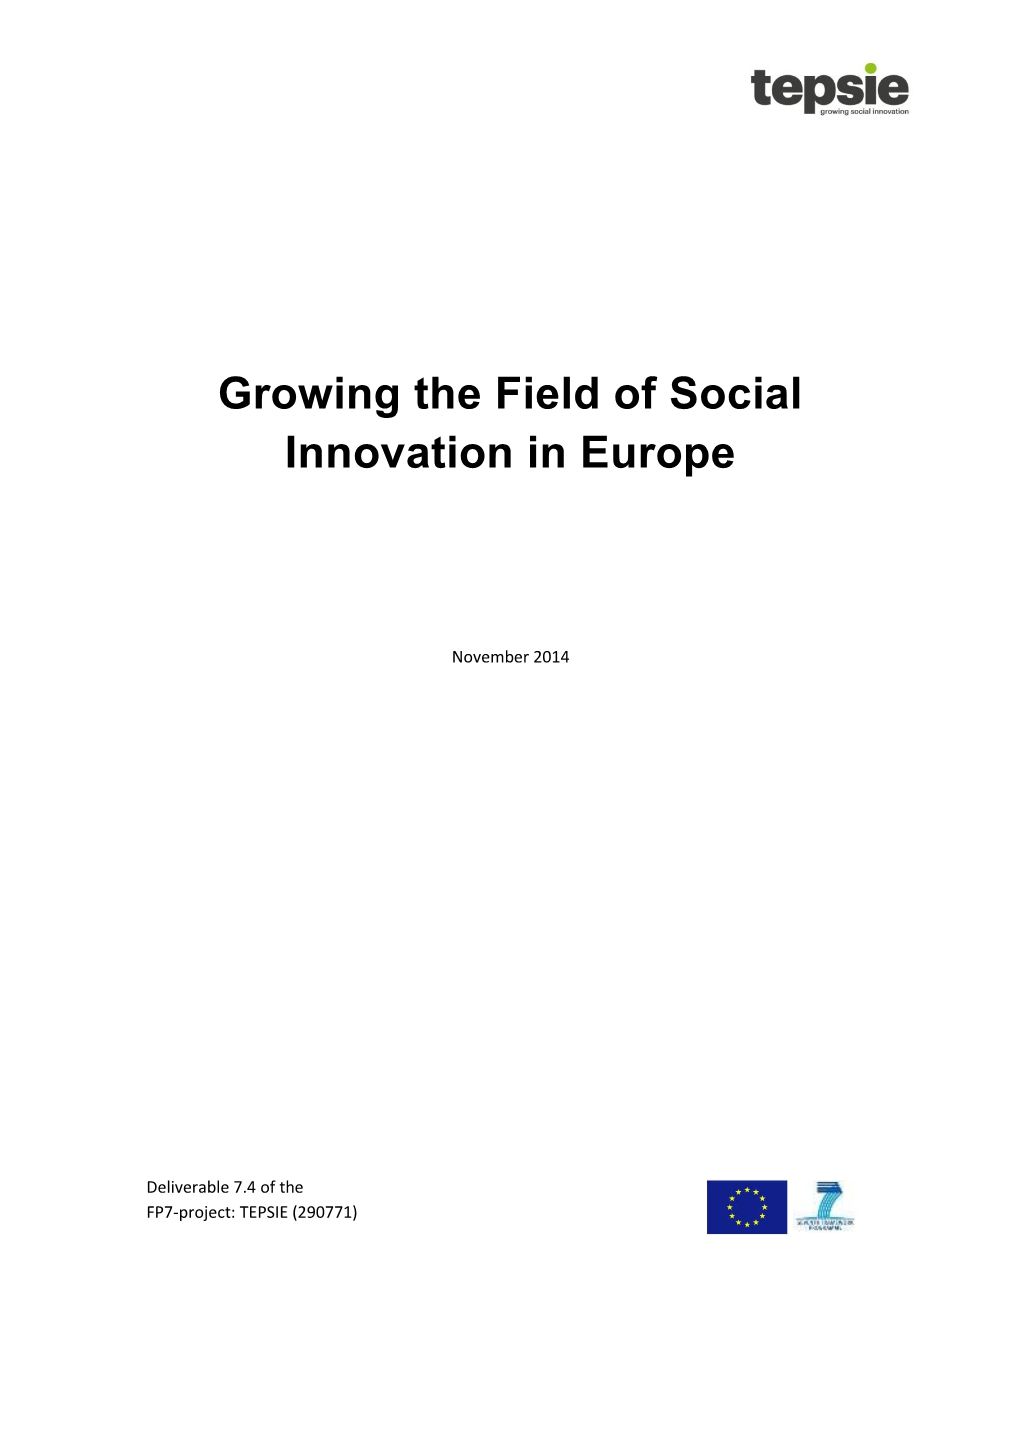 Growing the Field of Social Innovation in Europe